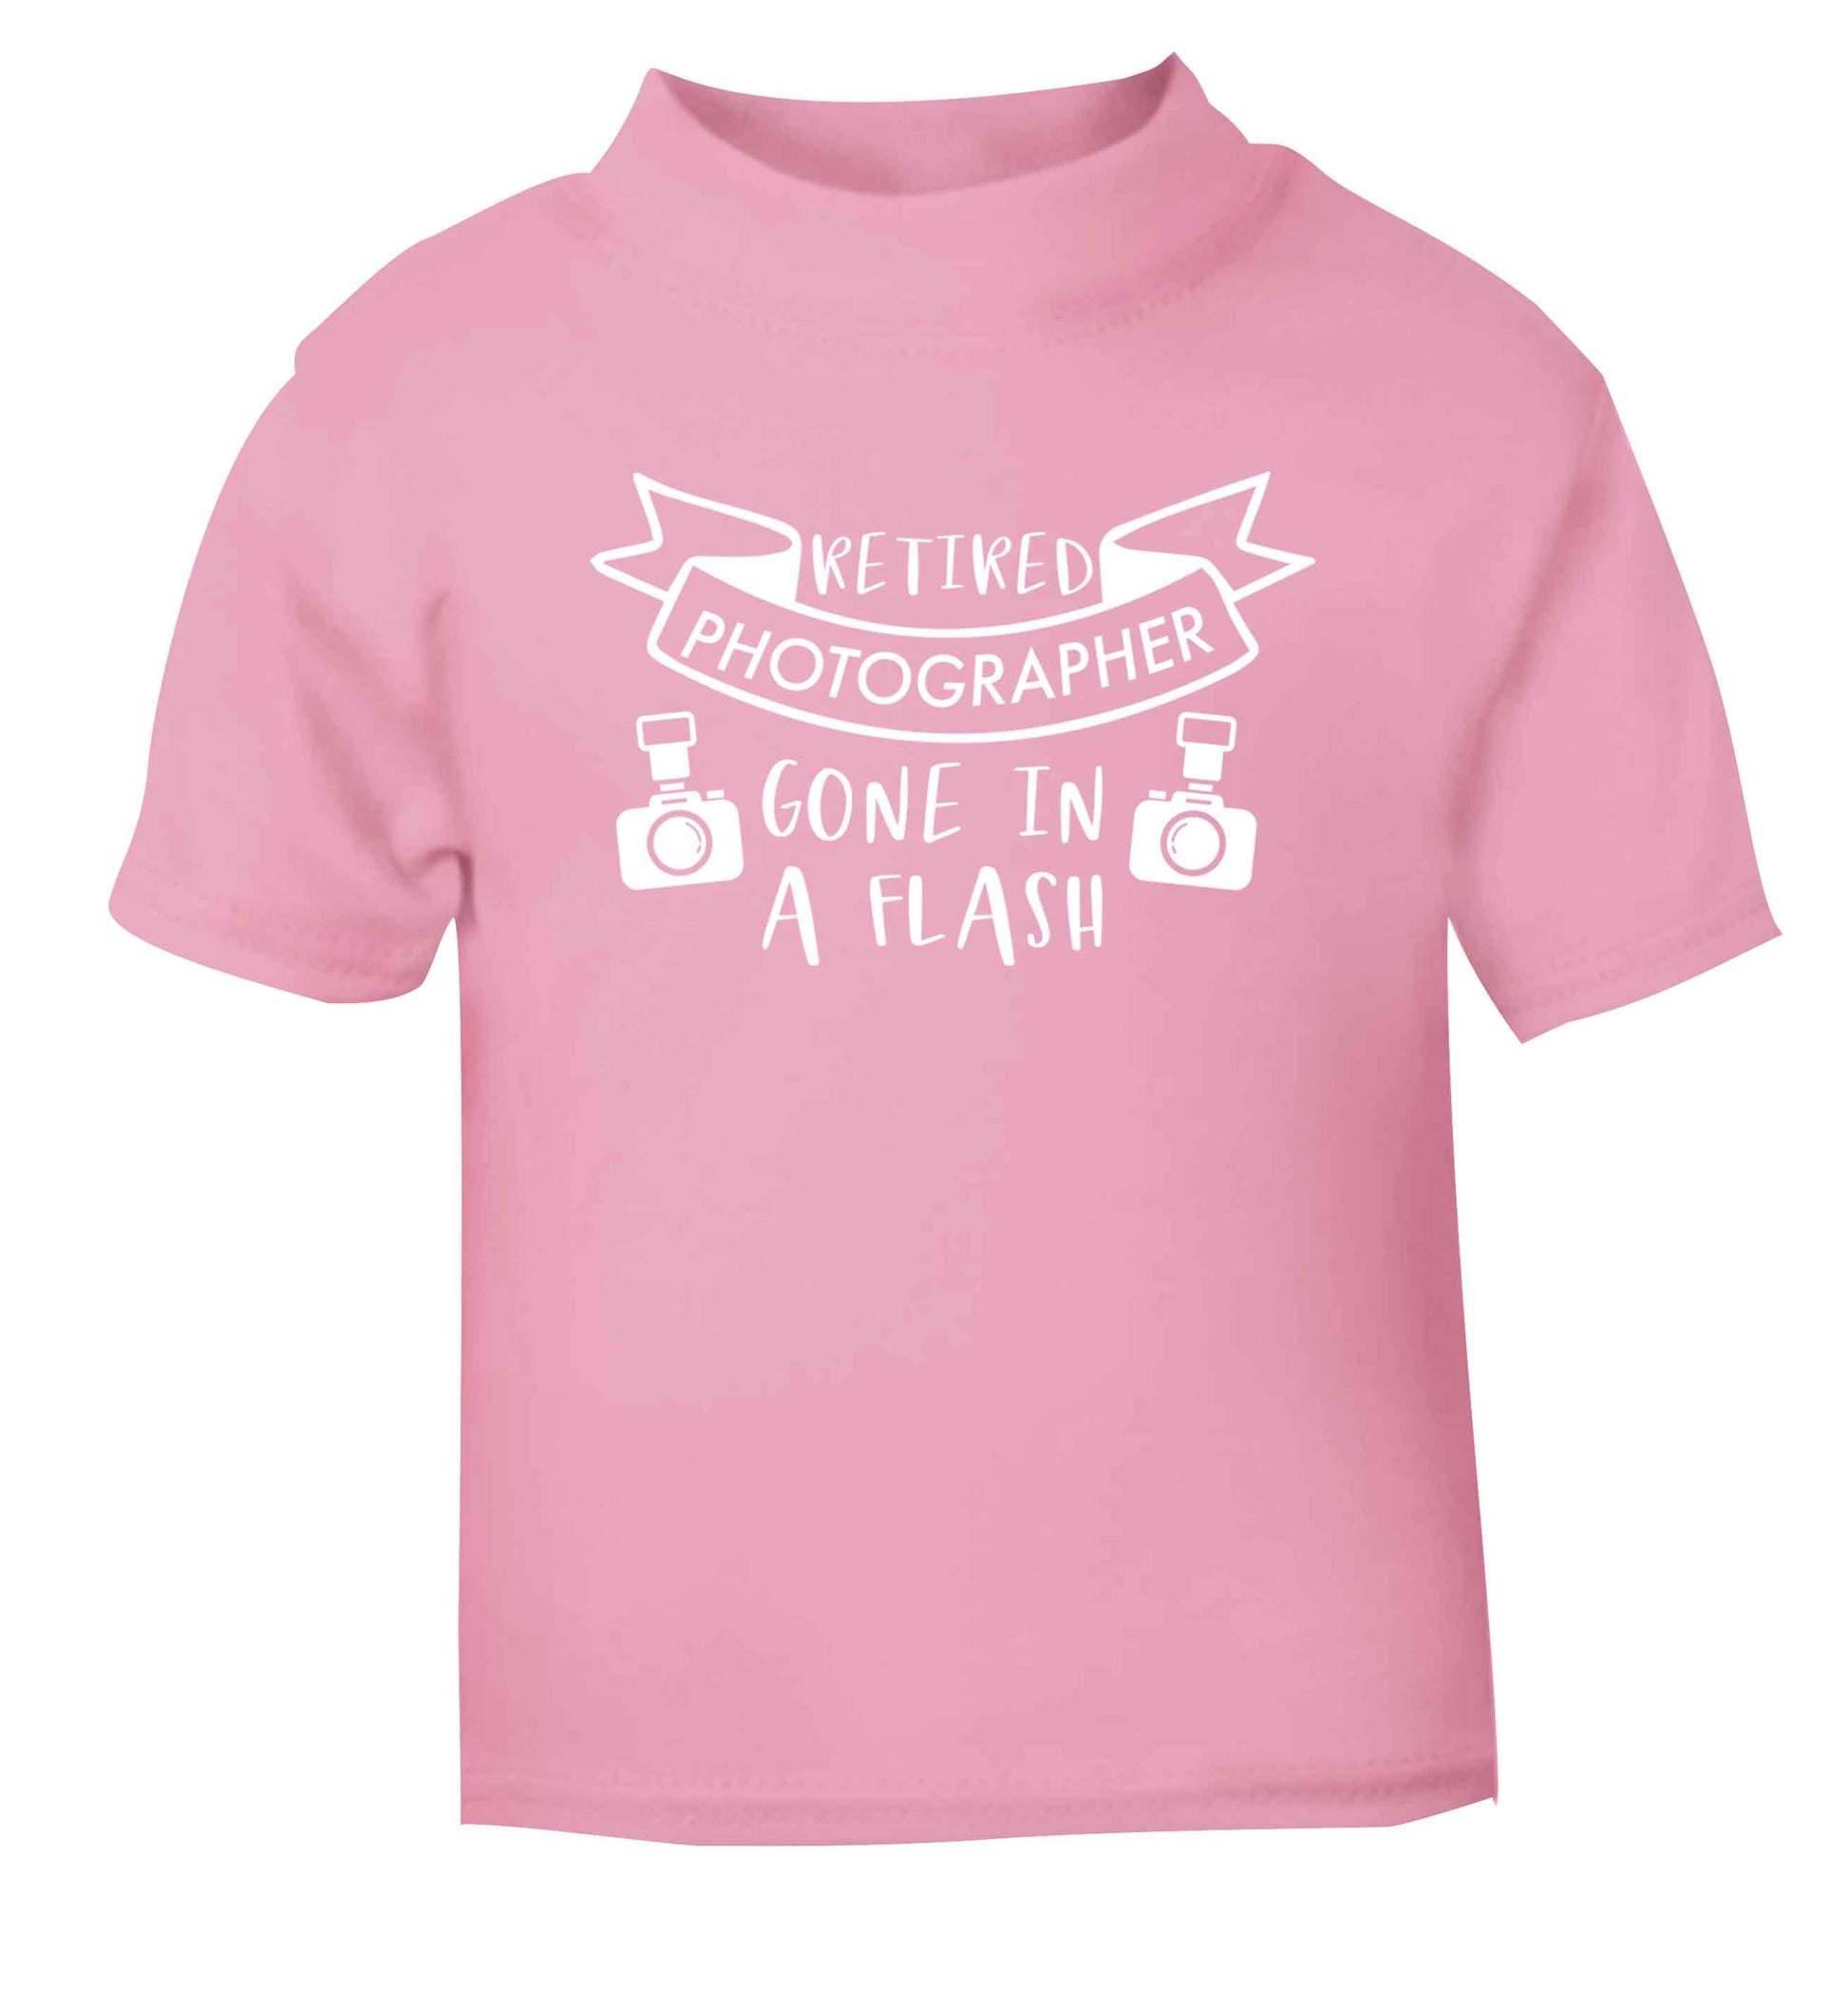 Retired photographer gone in a flash light pink Baby Toddler Tshirt 2 Years